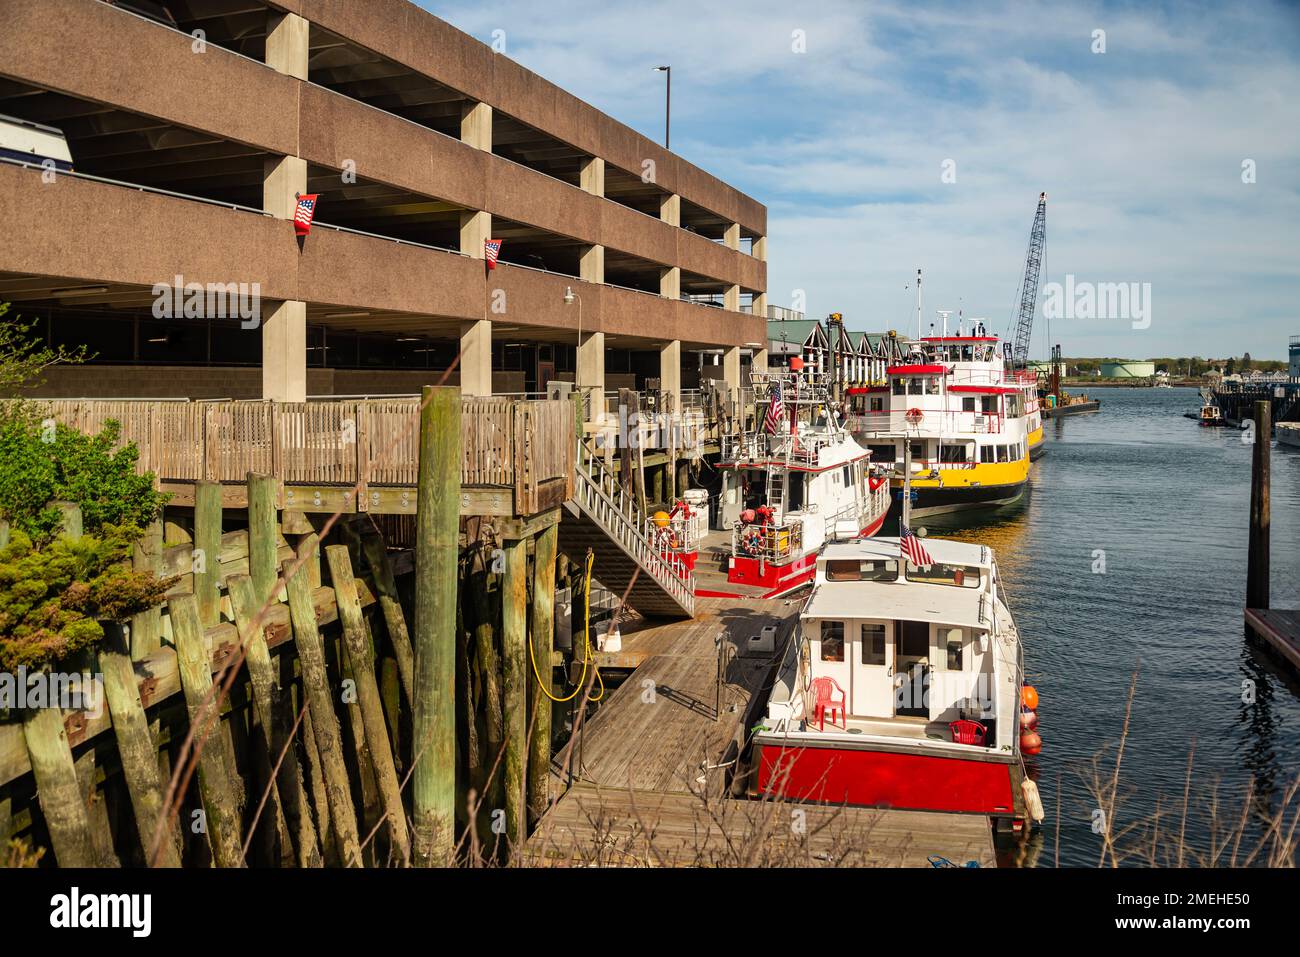 View of lobster boats in the Portland harbor, Casco Bay, Maine, United States. Stock Photo